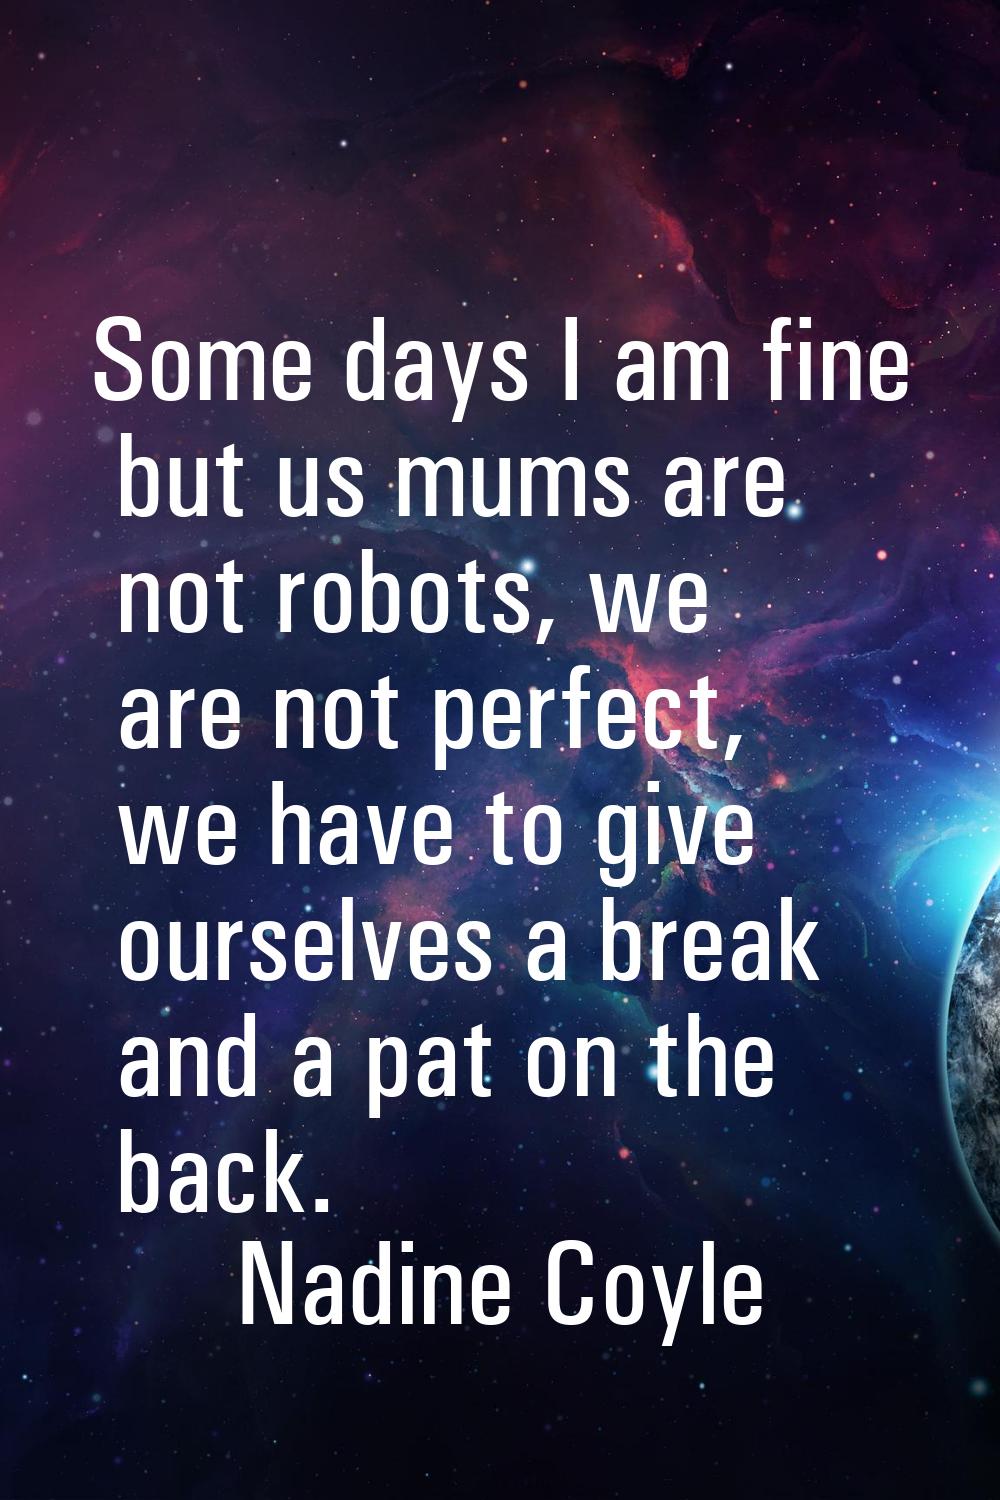 Some days I am fine but us mums are not robots, we are not perfect, we have to give ourselves a bre